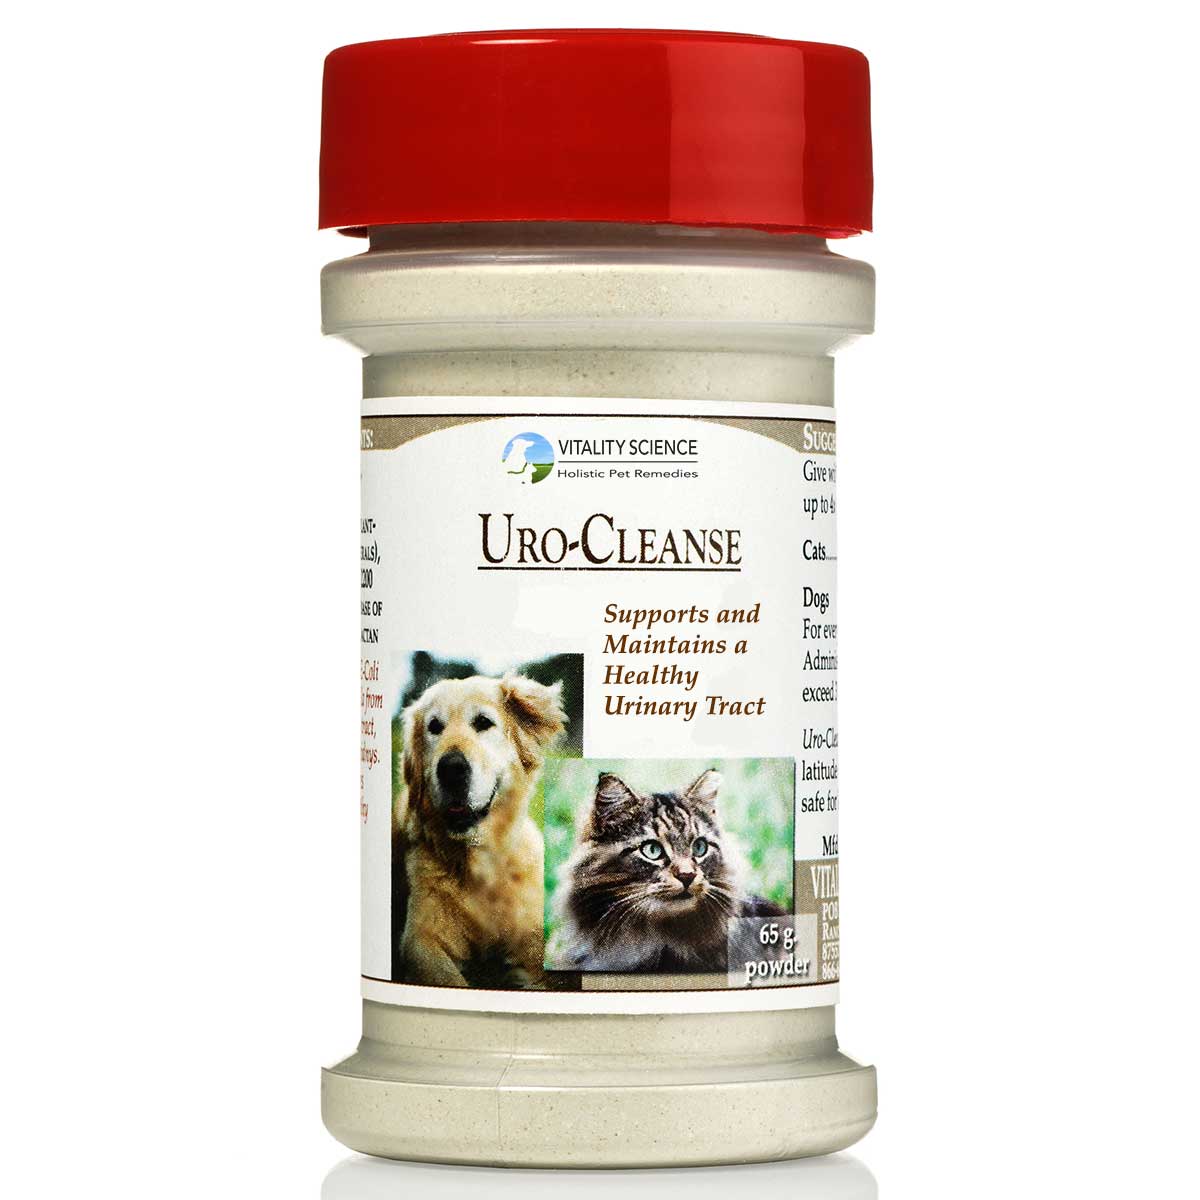 Uro-Cleanse for cat and dog